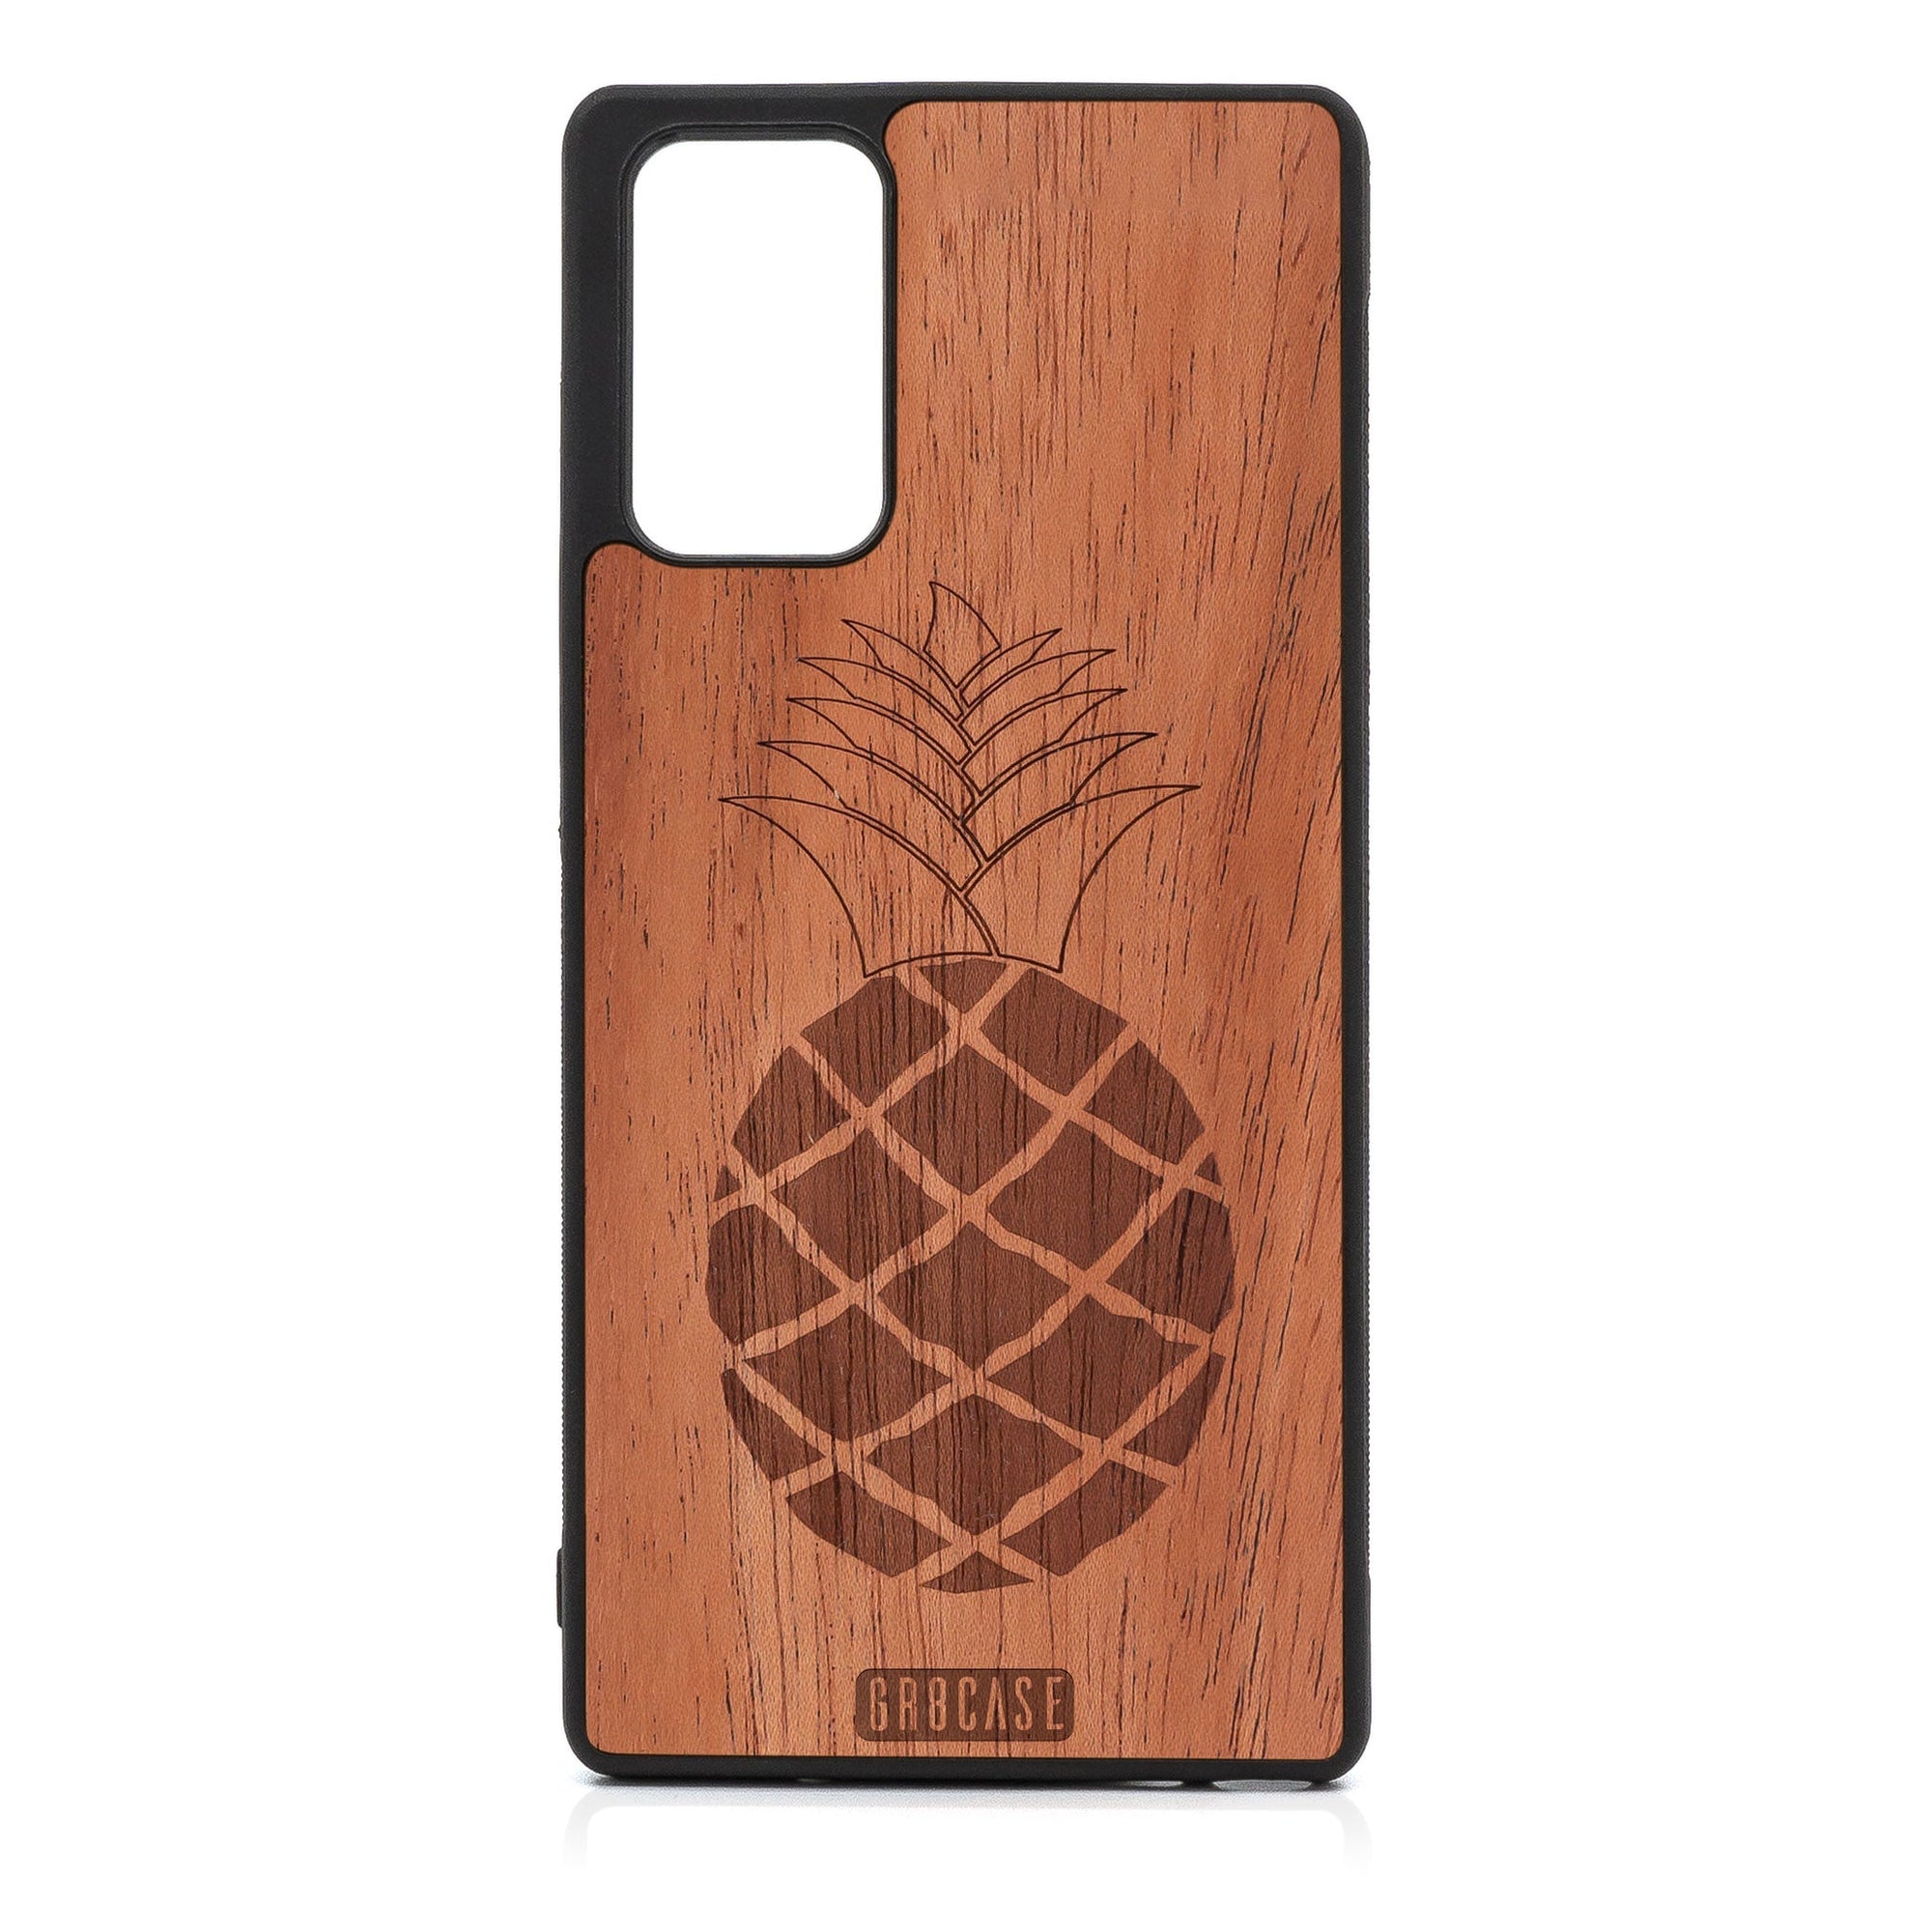 Pineapple Design Wood Case For Samsung Galaxy A52 5G